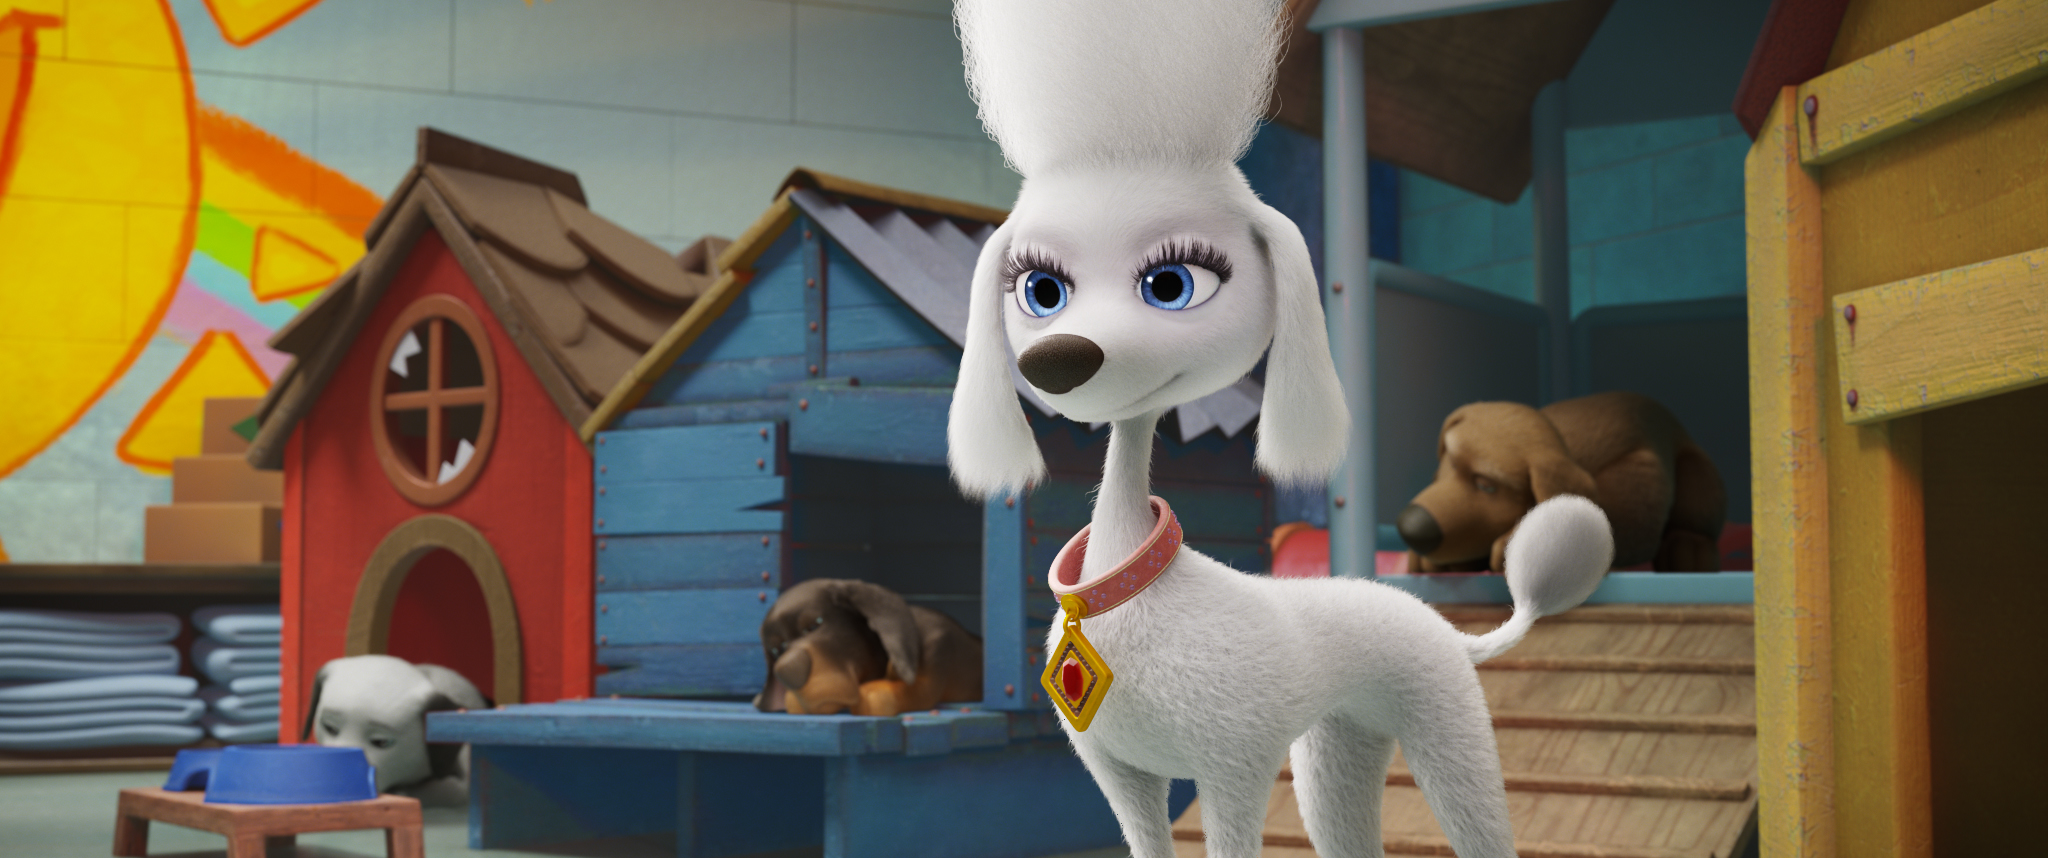 Delores (voiced by Kim Kardashian West) in PAW PATROL: THE MOVIE from Paramount Pictures. Photo Credit: Courtesy of Spin Master.